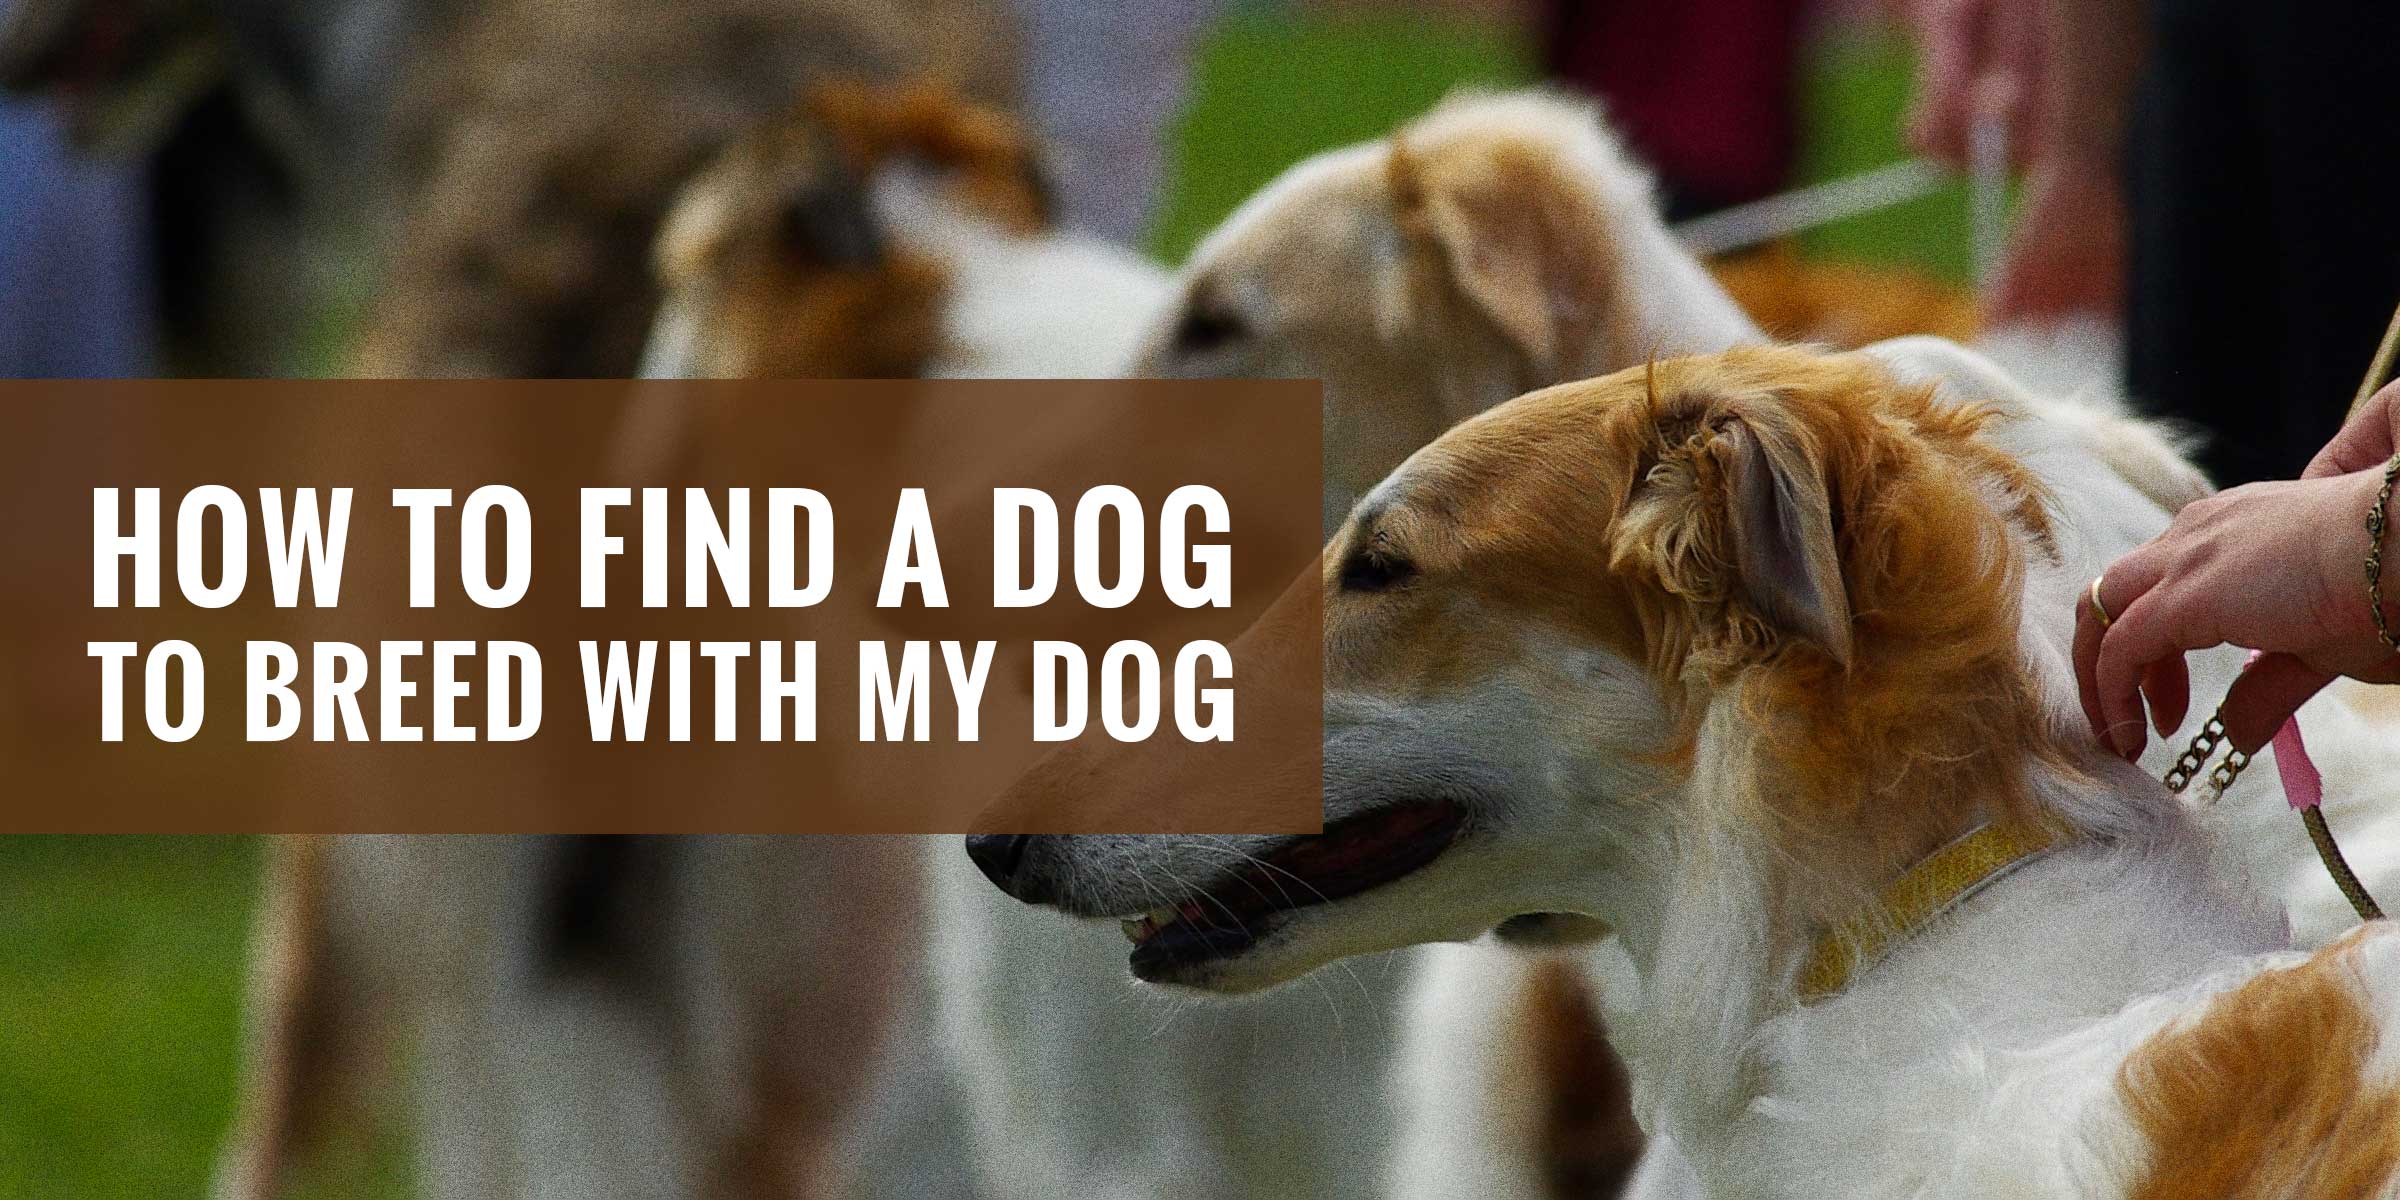 How to Find a Dog to Breed with My Dog